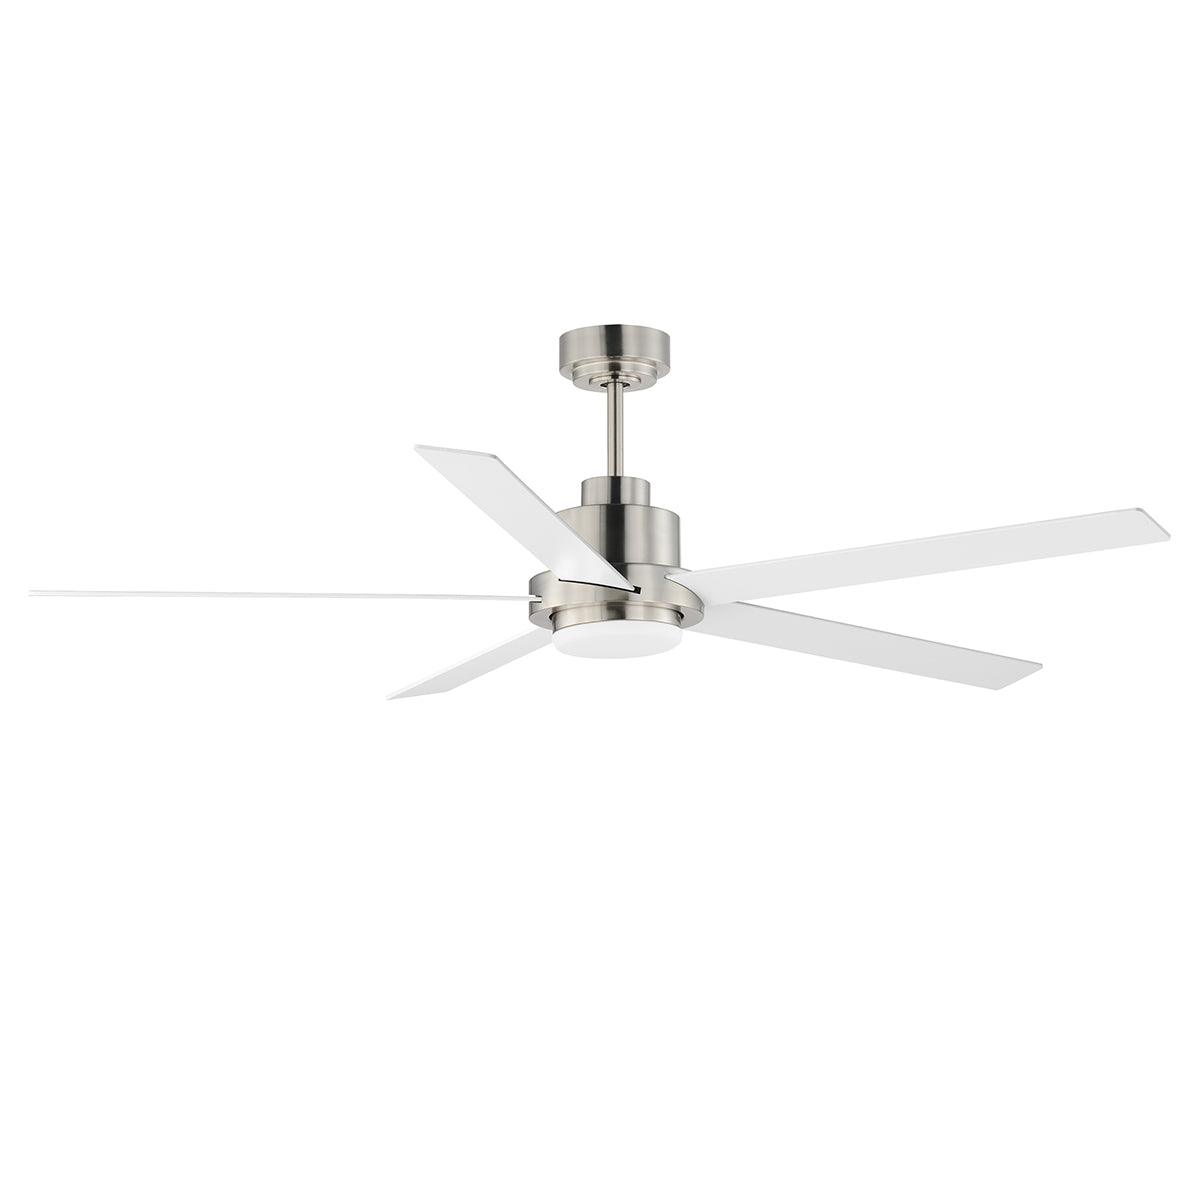 Daisy 60 Inch 5-Blade Ceiling Fan With Light and Wall Control